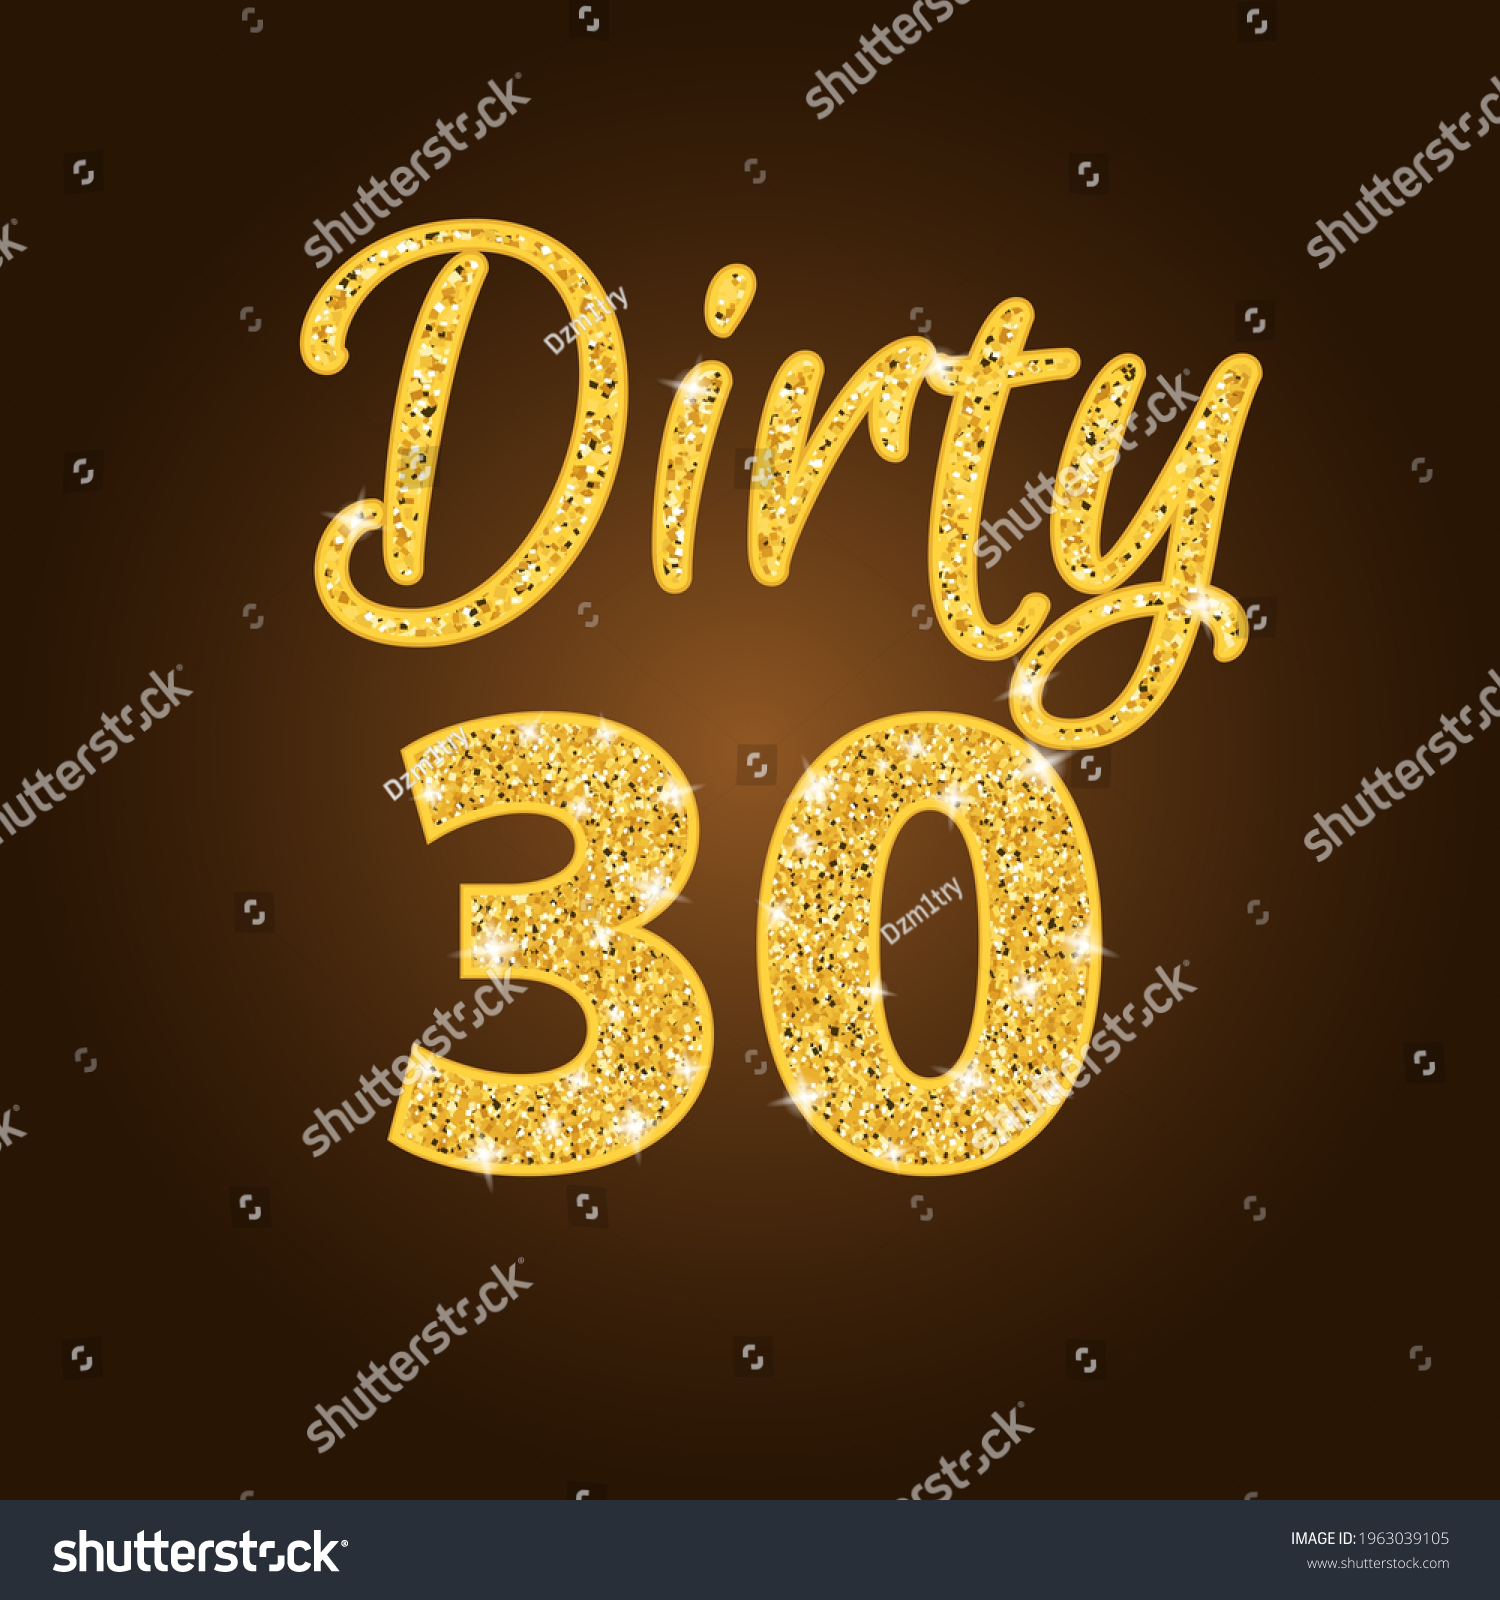 SVG of Dirty 30 glitter text on dark background. Clipart image svg